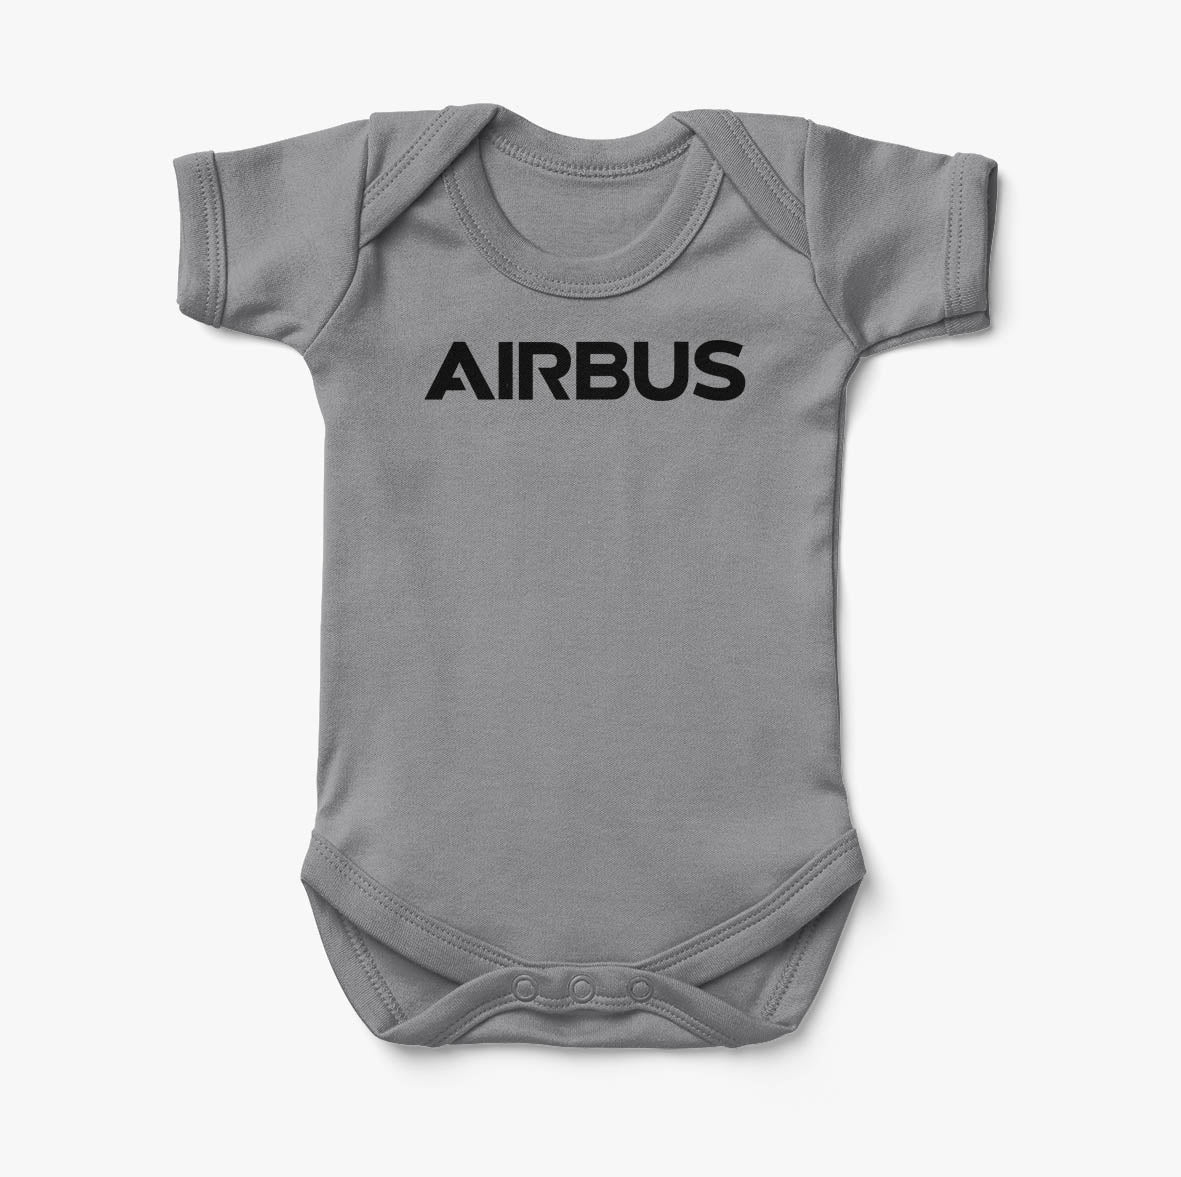 Airbus & Text Designed Baby Bodysuits